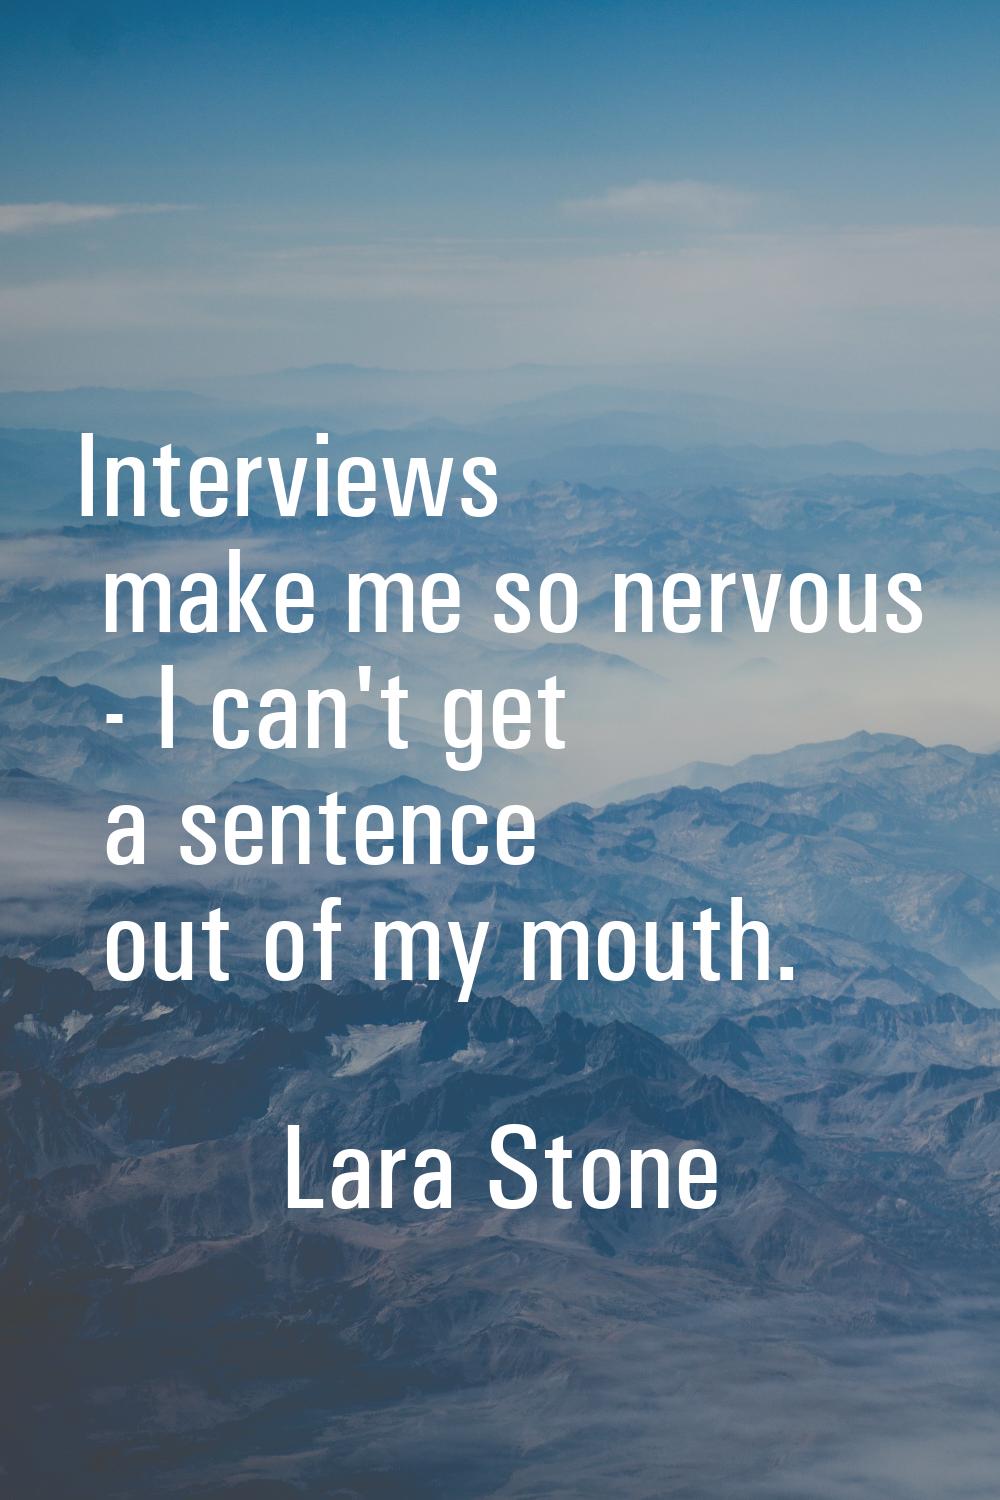 Interviews make me so nervous - I can't get a sentence out of my mouth.